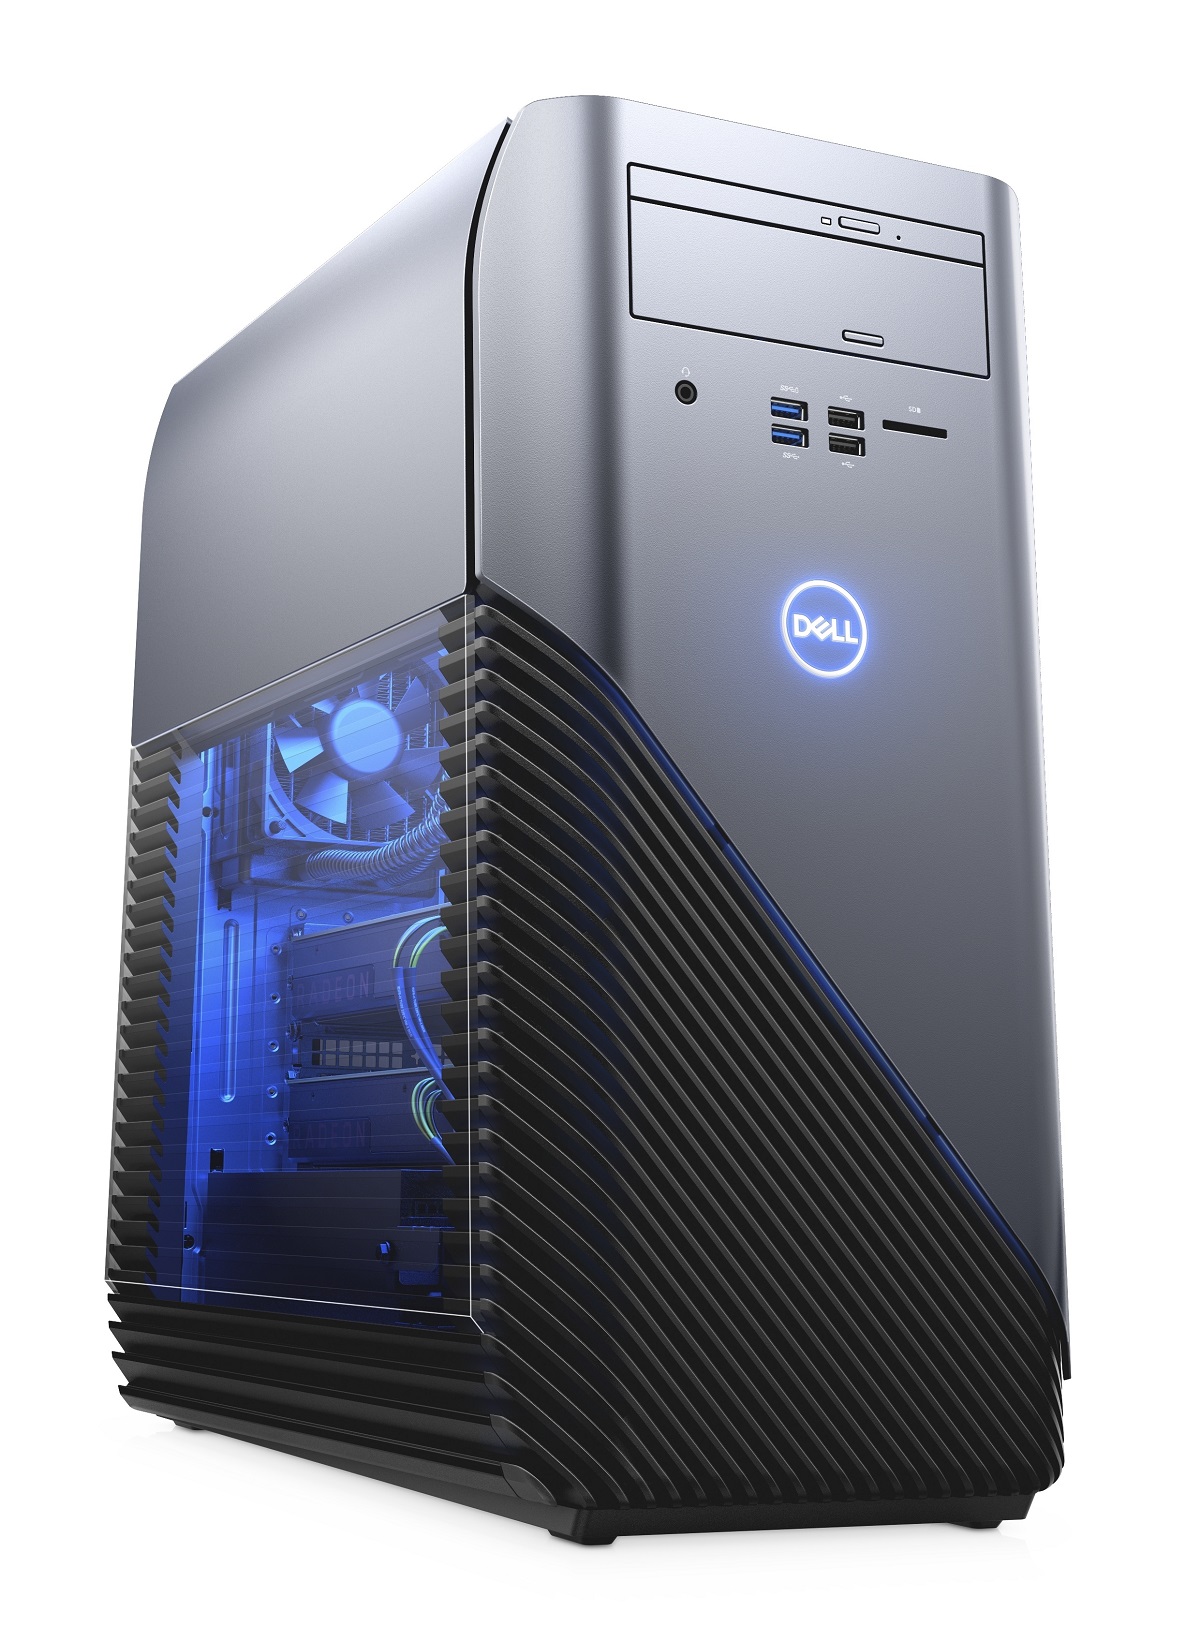 Dell Inspiron Gaming Desktop with clear side panel